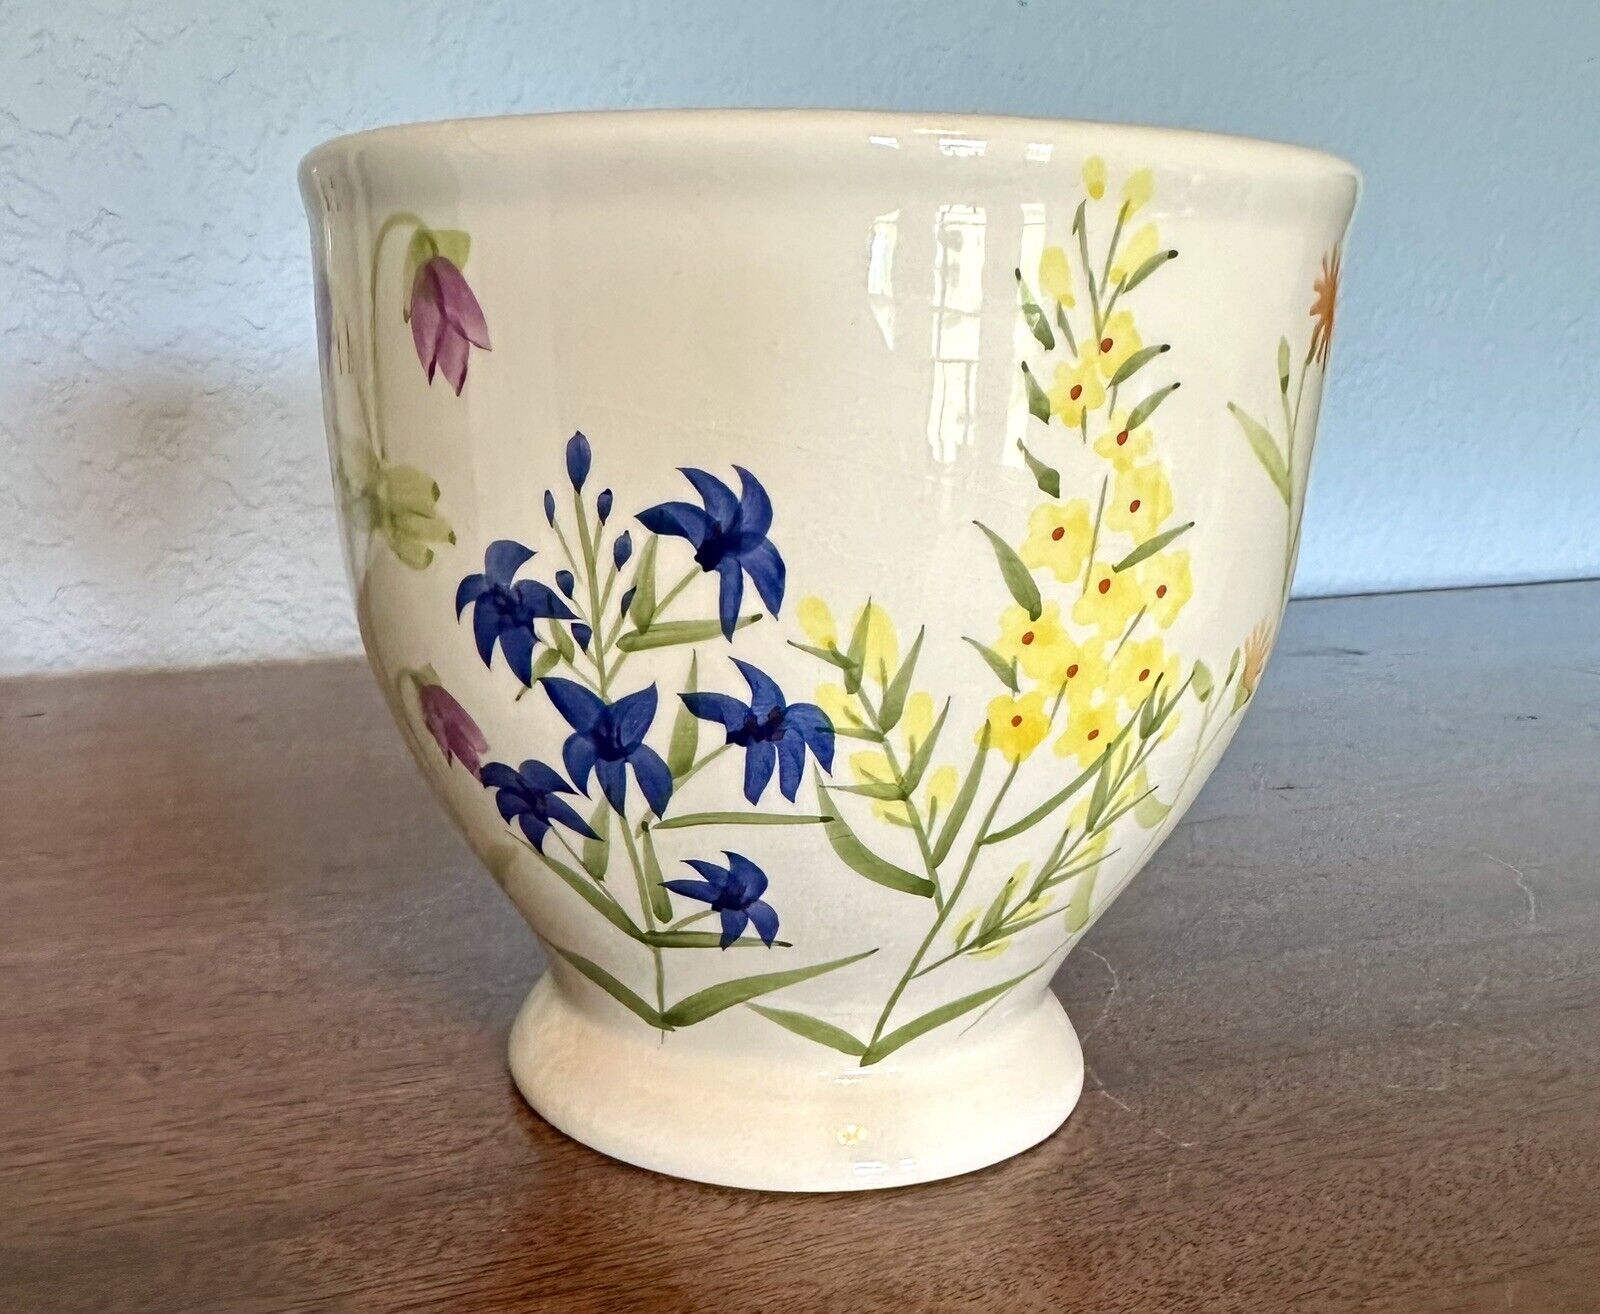 Vintage Footed Floral Planter Hand-painted 5”x5.25”